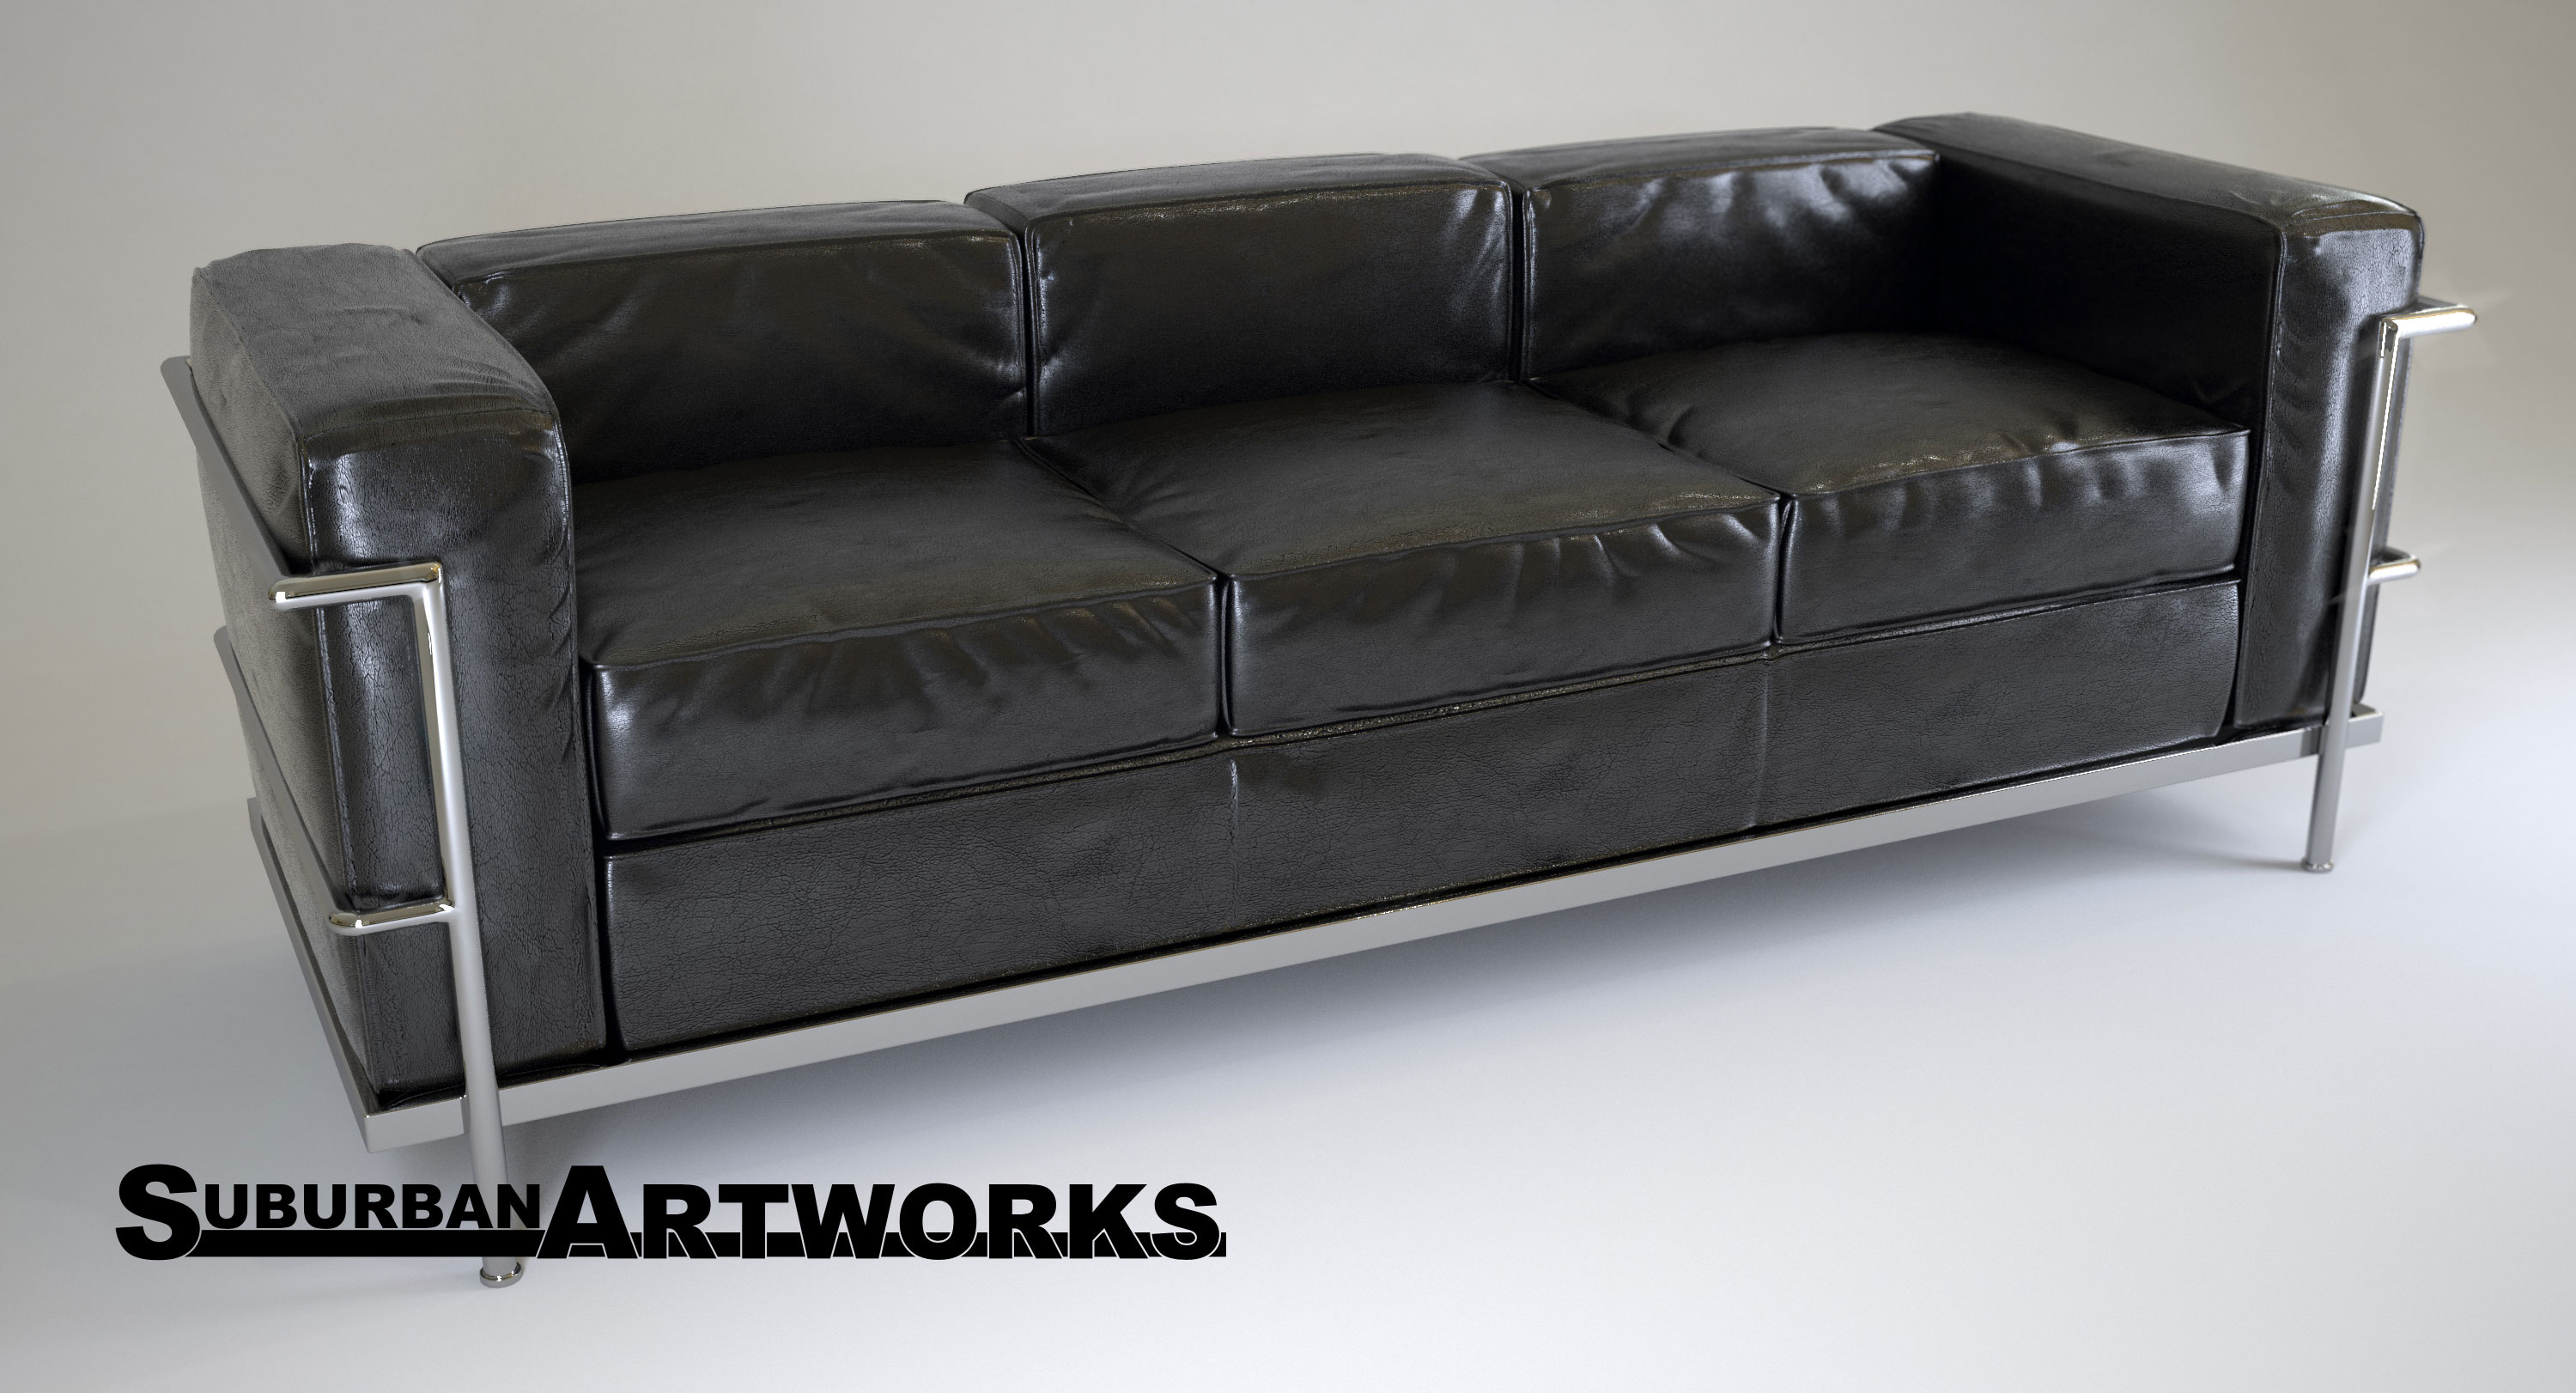 3d model rendering of a corbusier couch